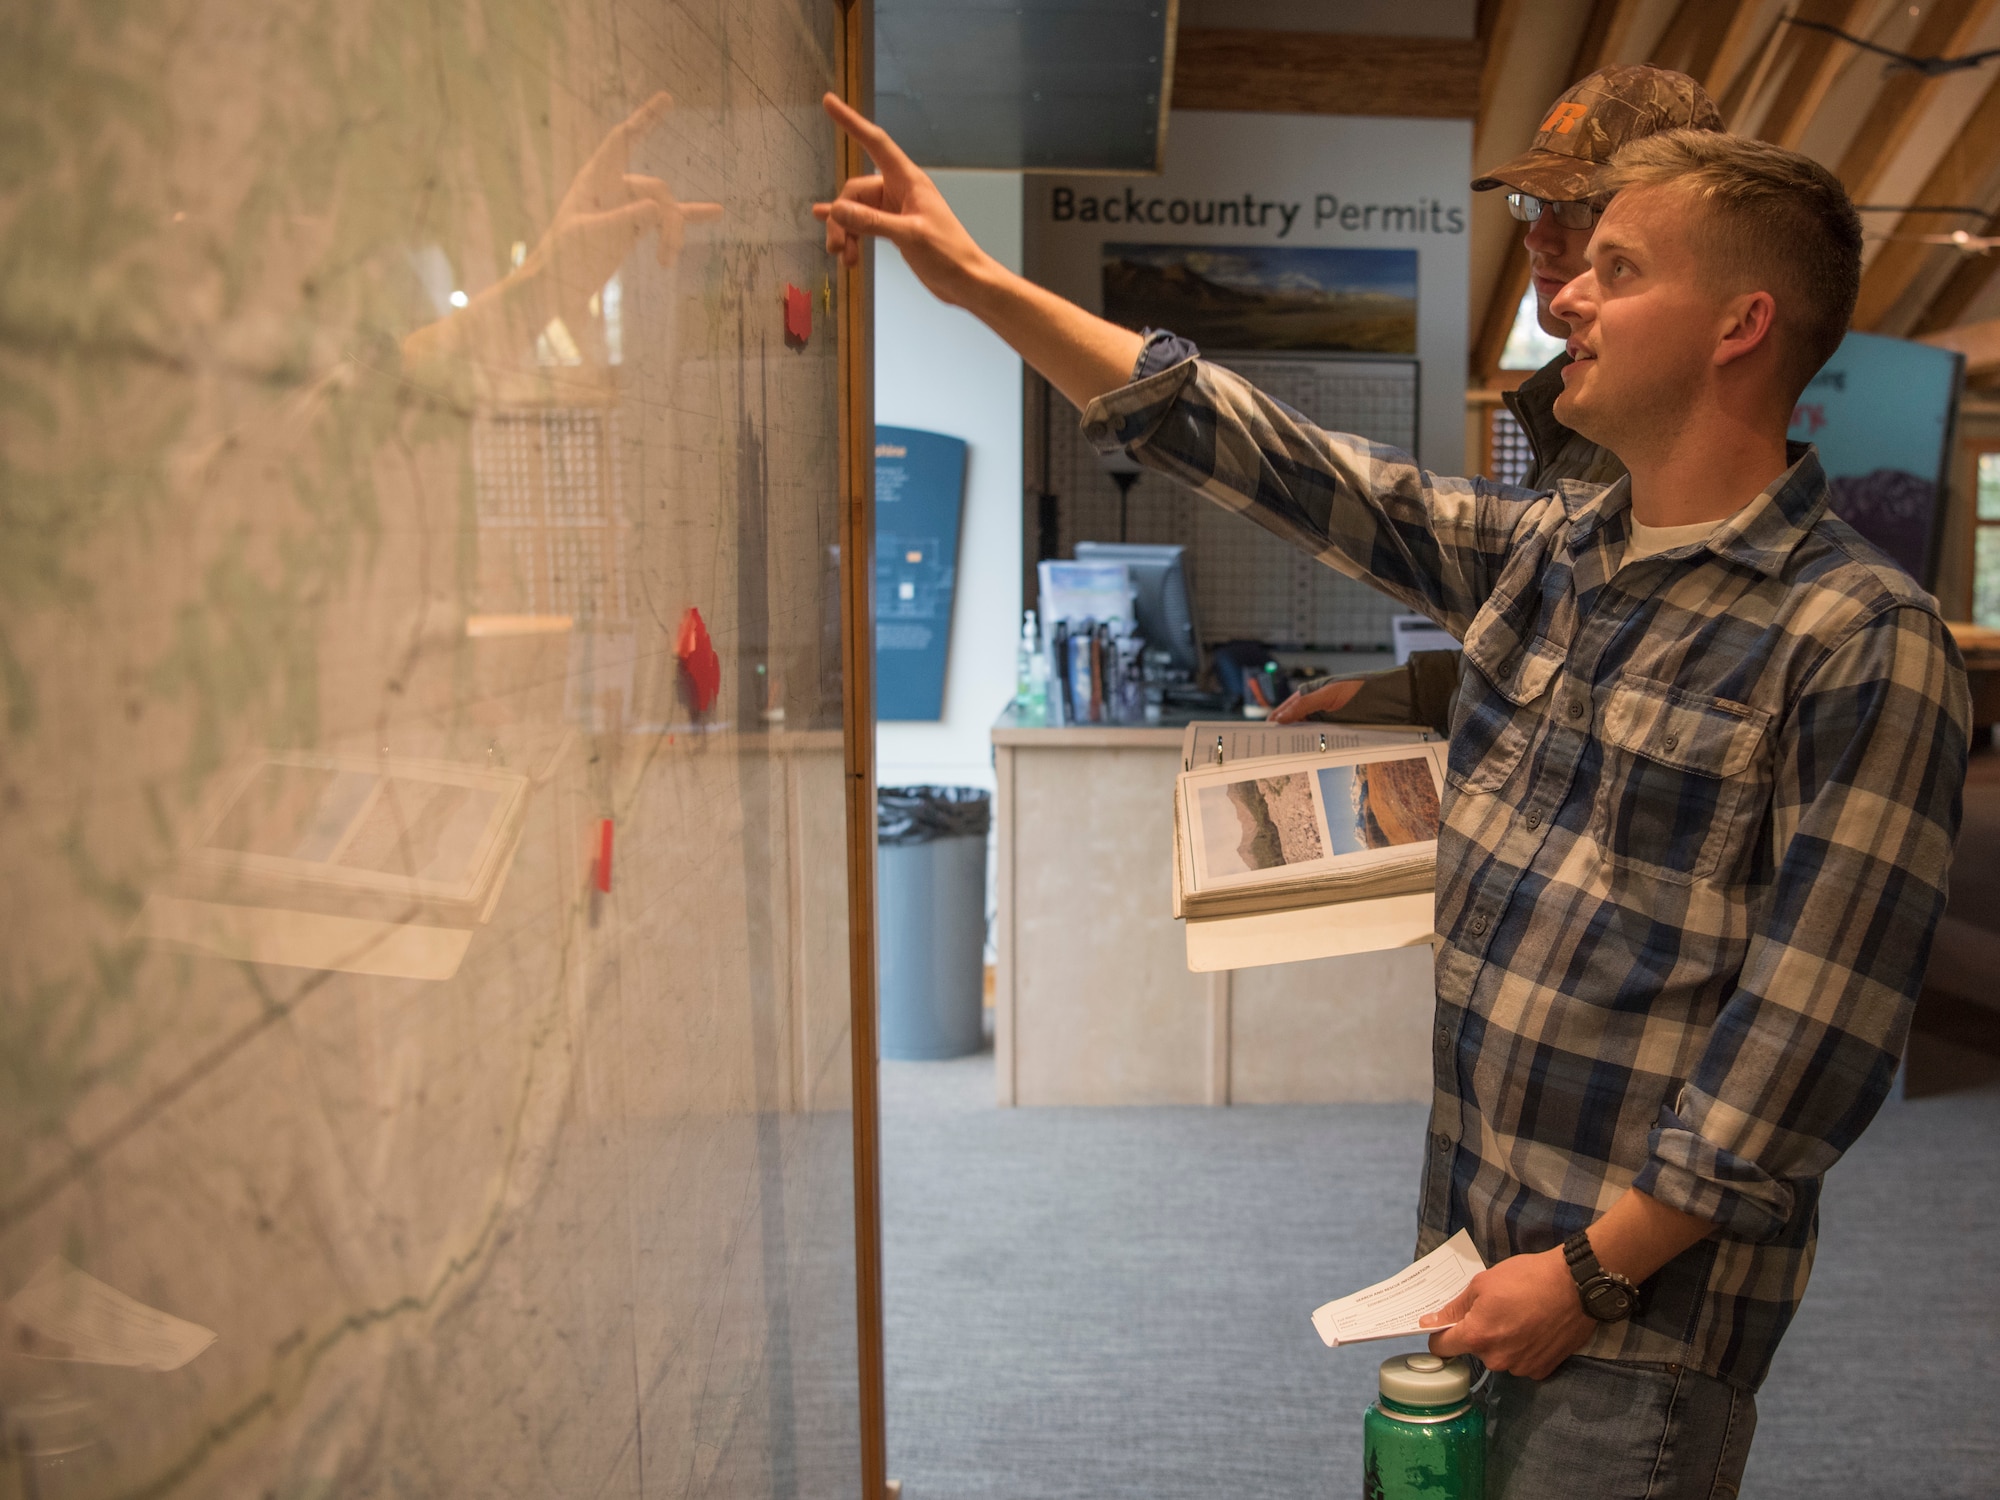 U.S. Air Force 1st Lt. John Ininns, a 673d Medical Group perianesthesia nurse and 1st Lt. Jacob Bowman, a Nellis Air Force Base, Nevada, 99th Medical Group clinical nurse, use a map, hanging in the Main Visitor Center, to plan a trip at Denali National Park and Preserve, Alaska, Sept. 15, 2018. The 11th annual Military Appreciation Day included 400 “road lottery” tickets given out to Alaska-based service members. They used the park’s available resources to plan a backcountry backpacking trip at the park following the event.